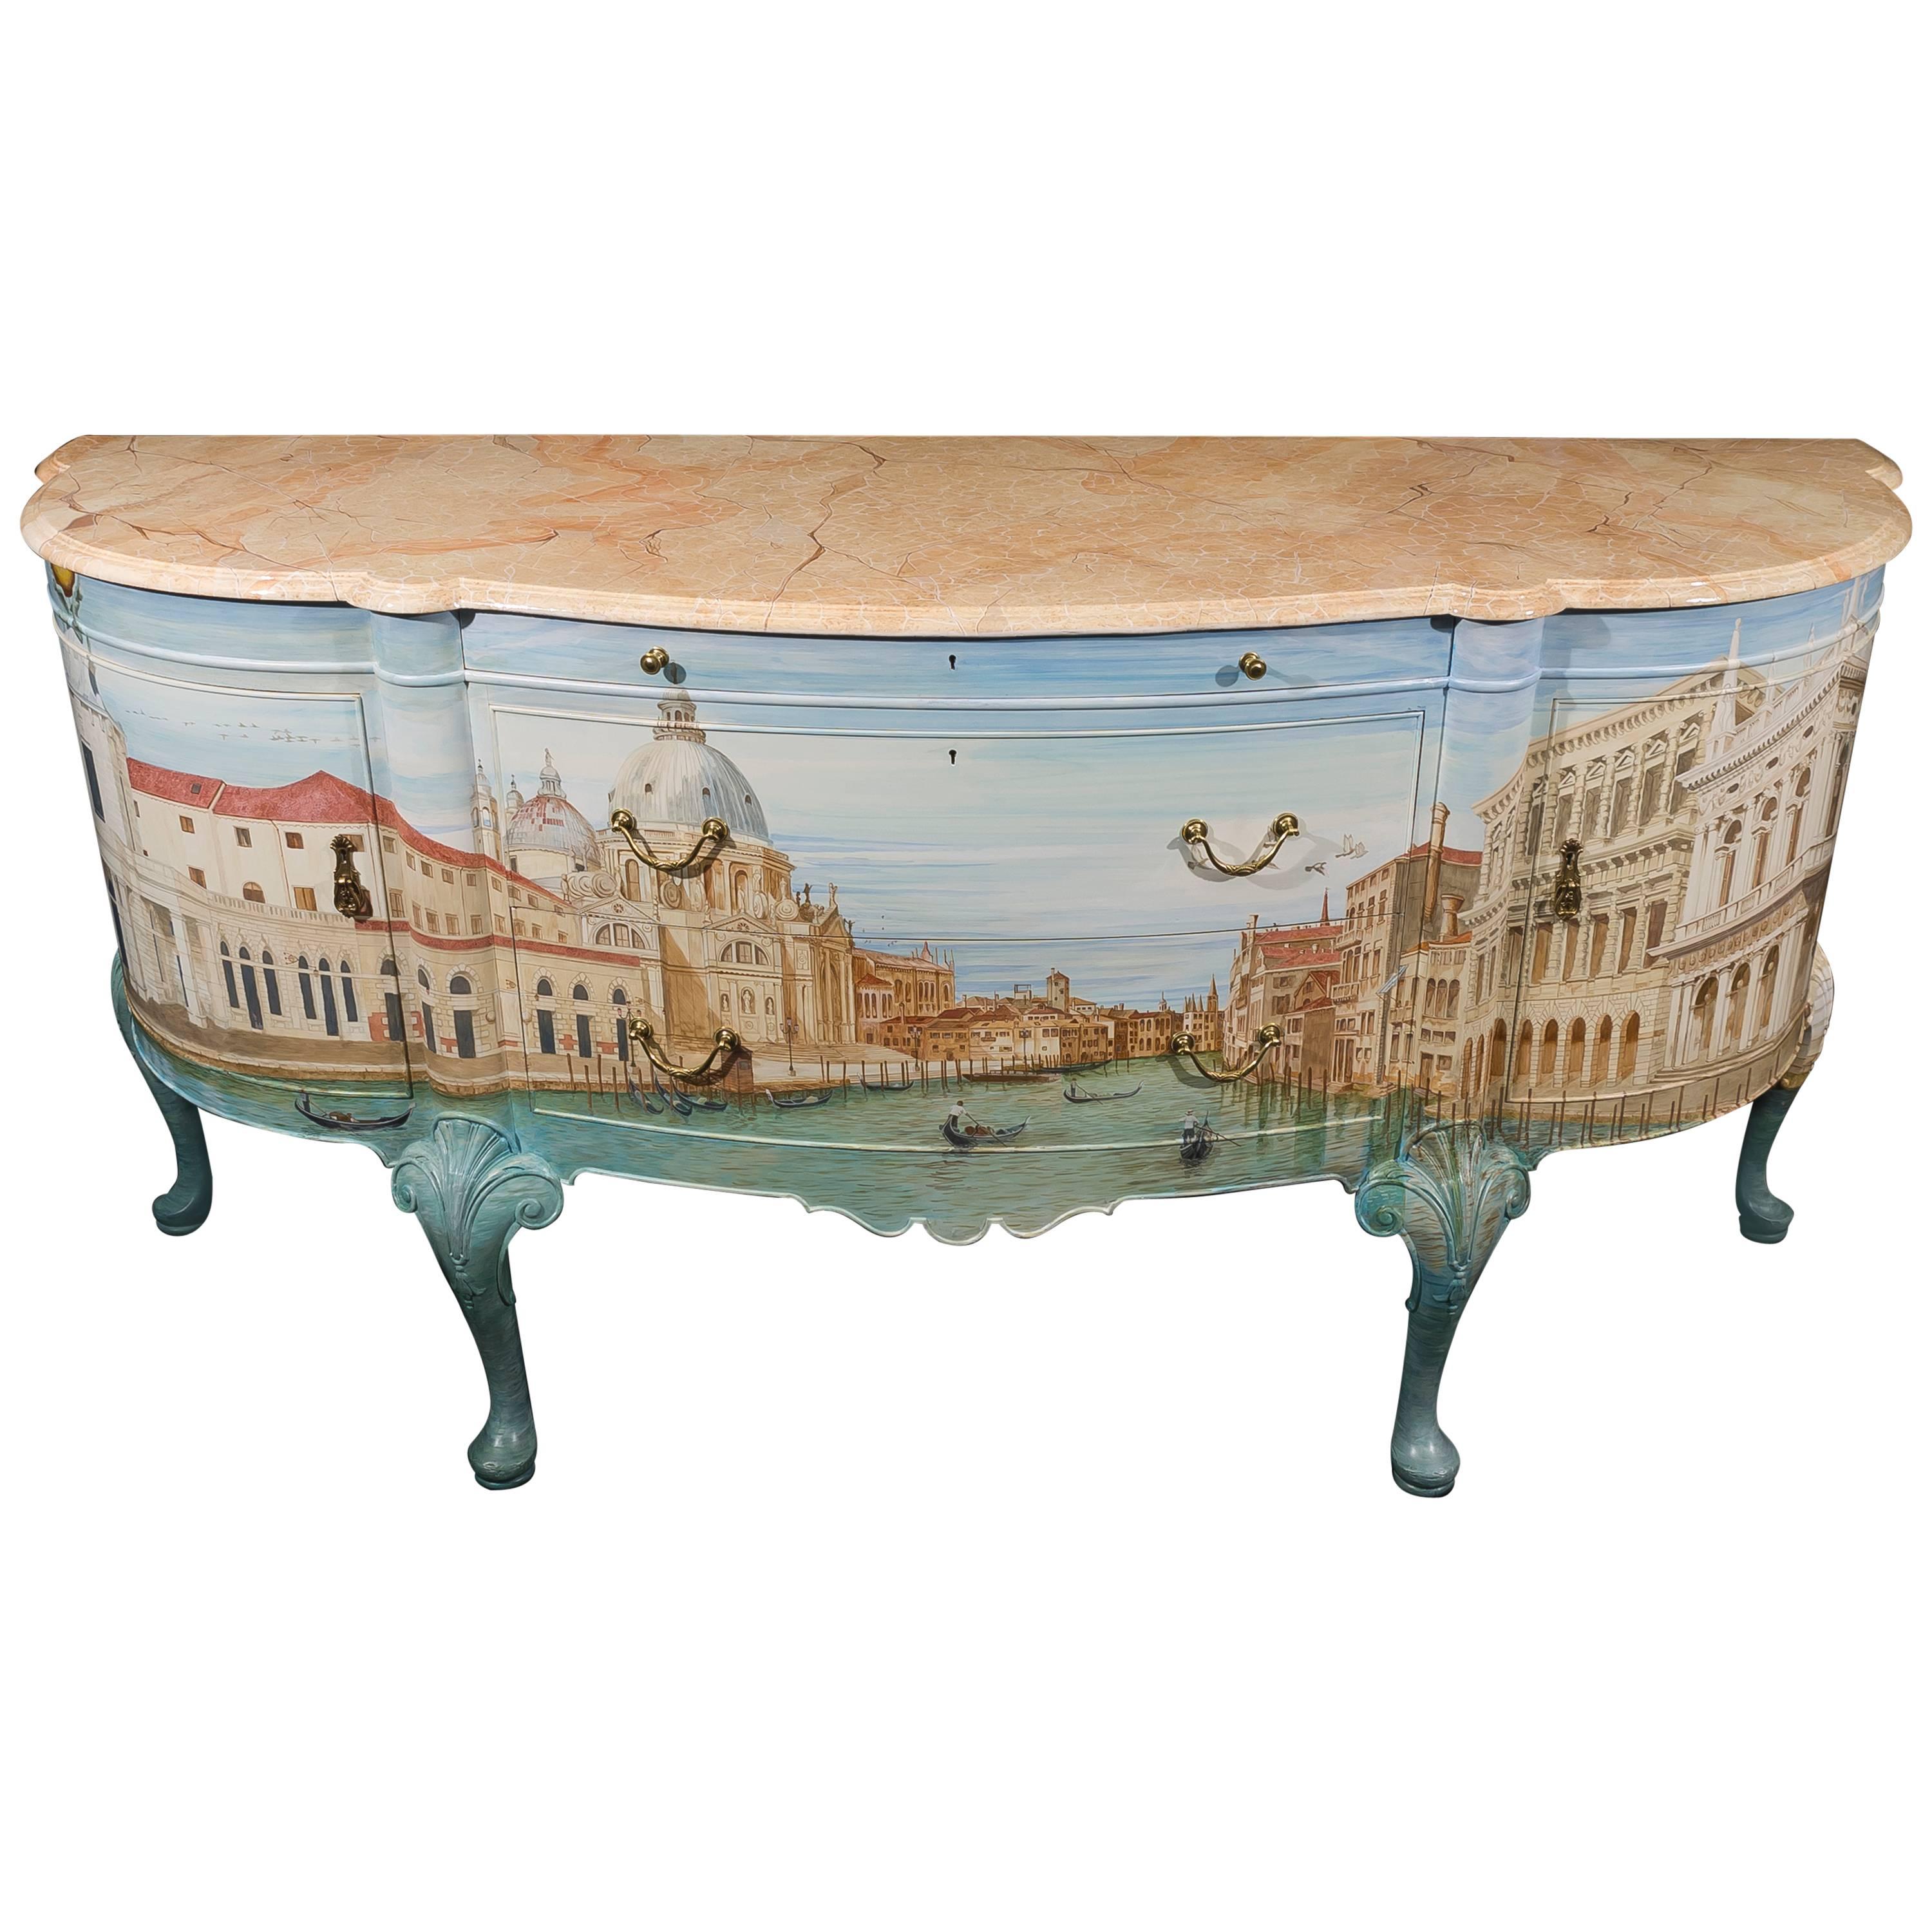 1932 Waring and Gillow British Sideboard Hand-Painted by Kensa Design For Sale